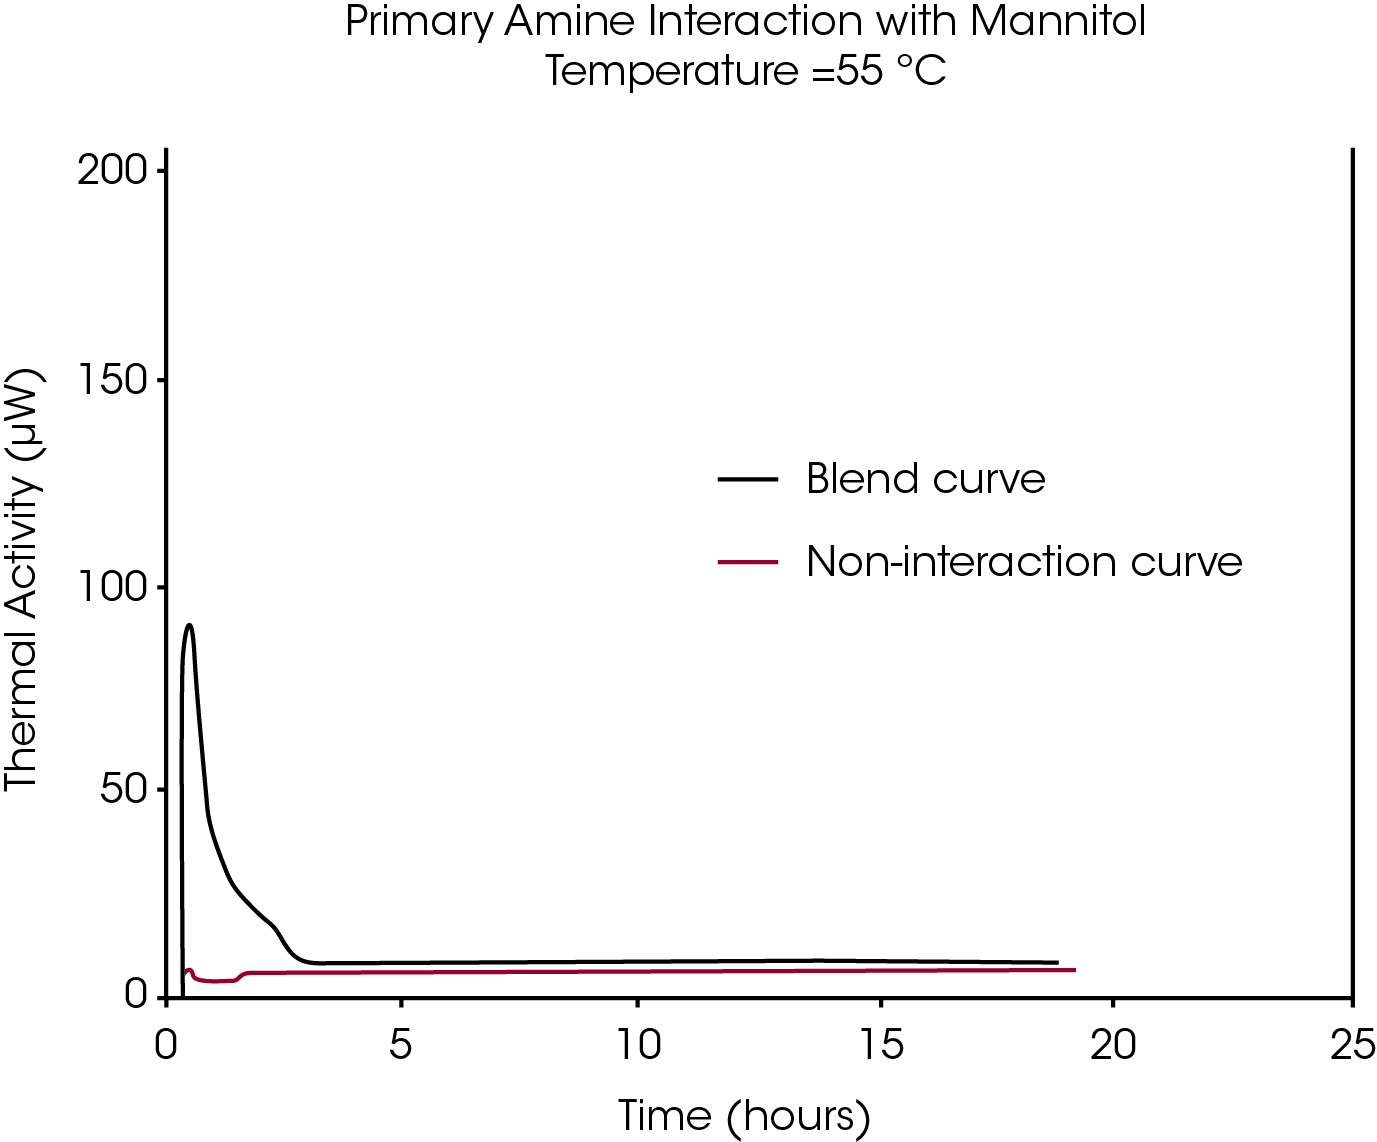 Figure 5. Lack of interaction of an API containing a primary amine with mannitol